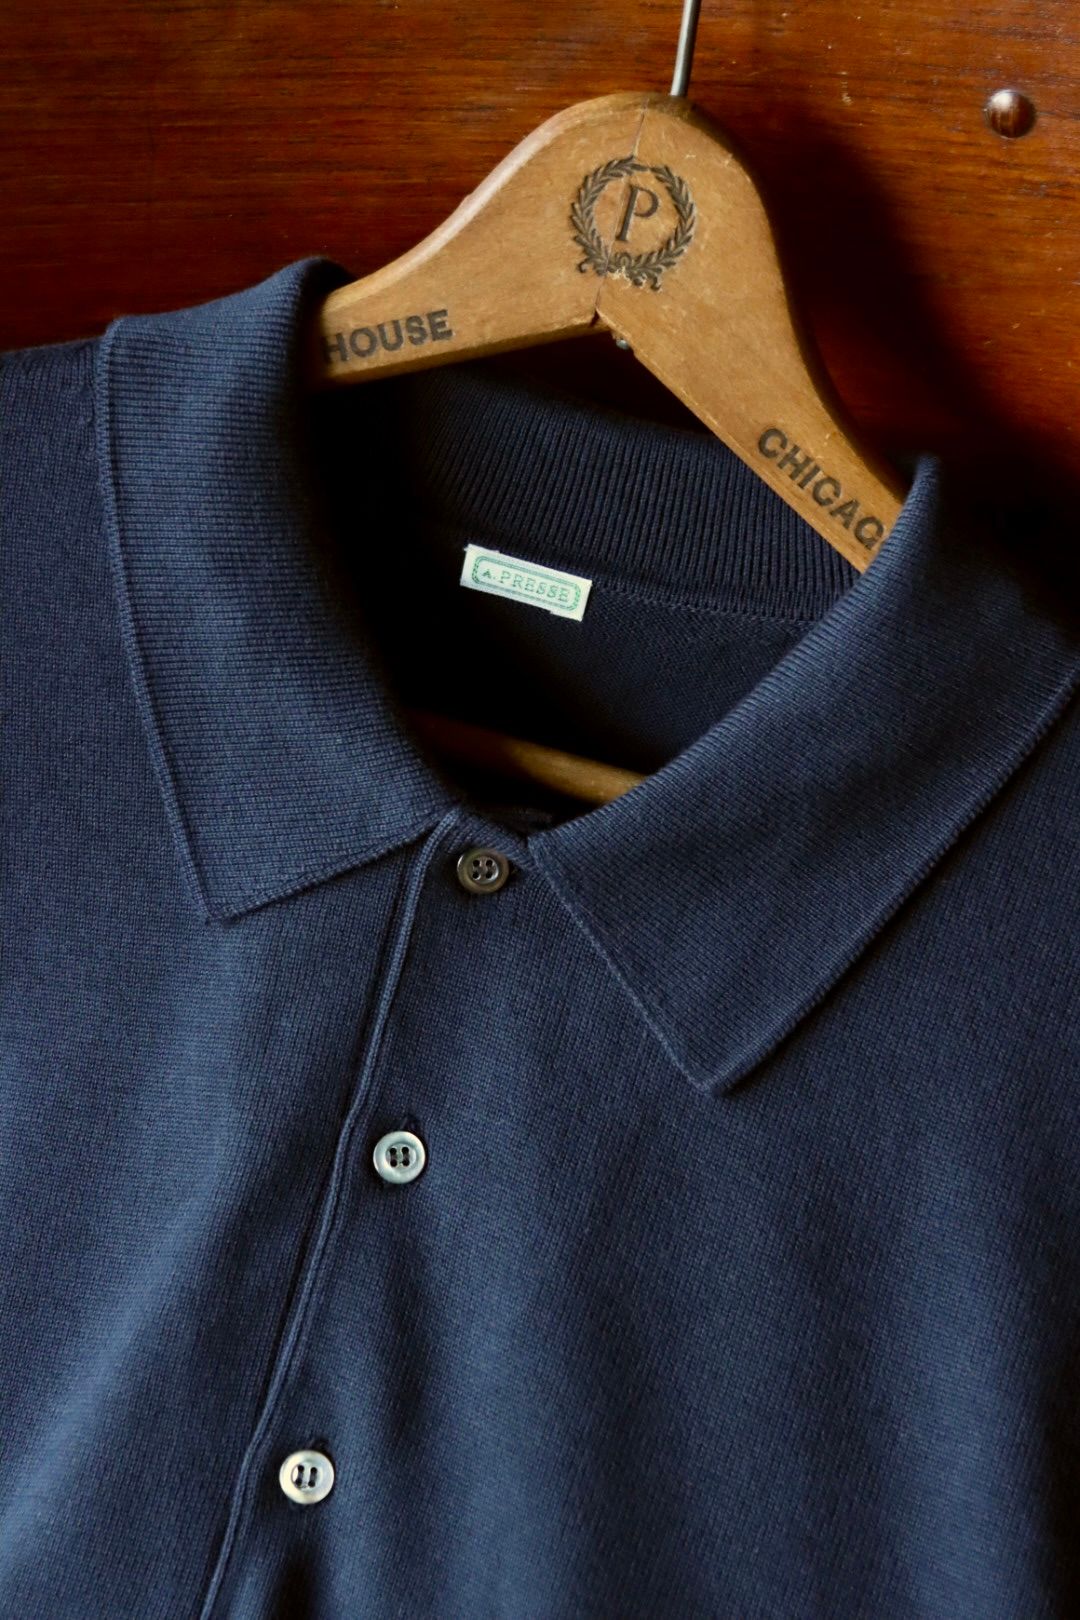 A.PRESSE - アプレッセ24SS ポロシャツCotton Knit L/S Polo Shirts ...